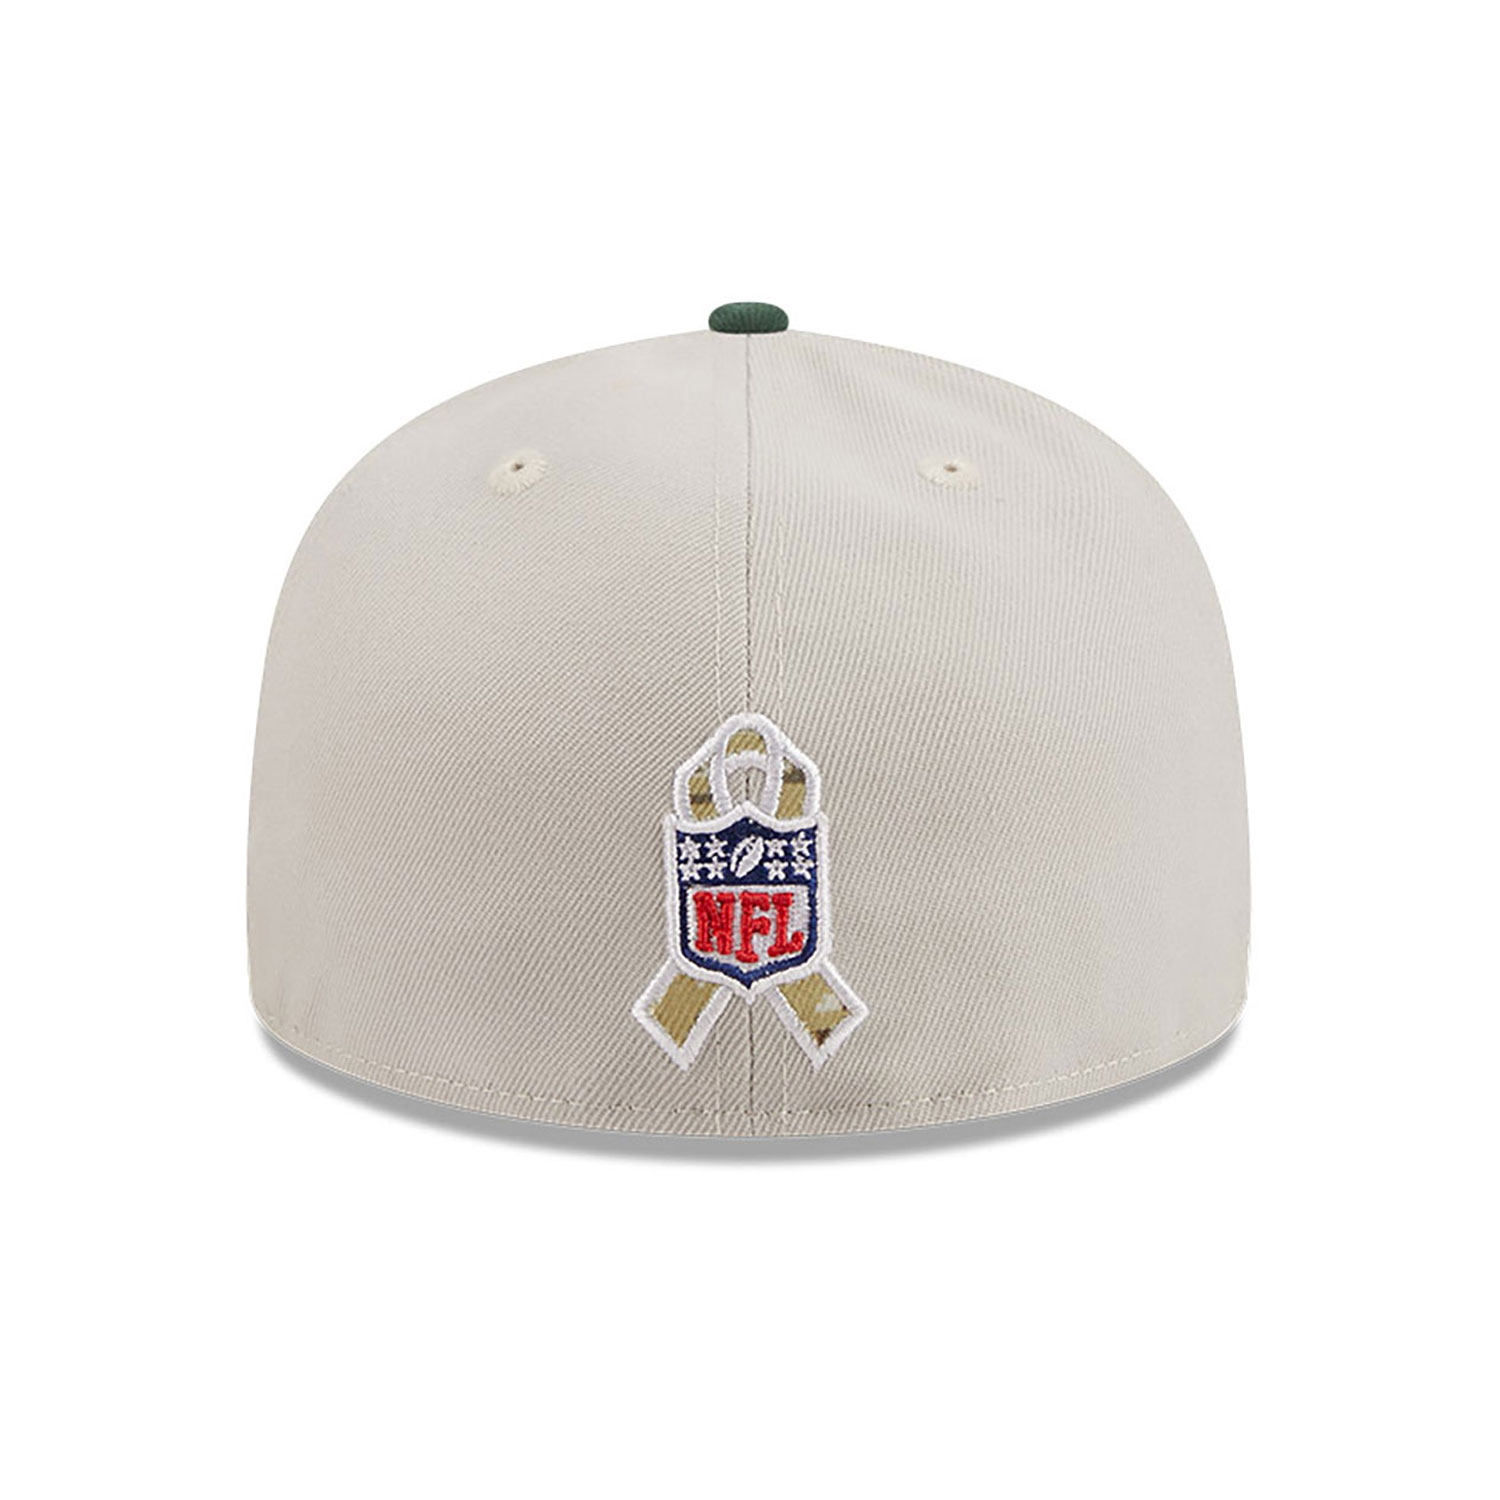 Green Bay Packers NFL Salute To Service Stone 59FIFTY Fitted Cap